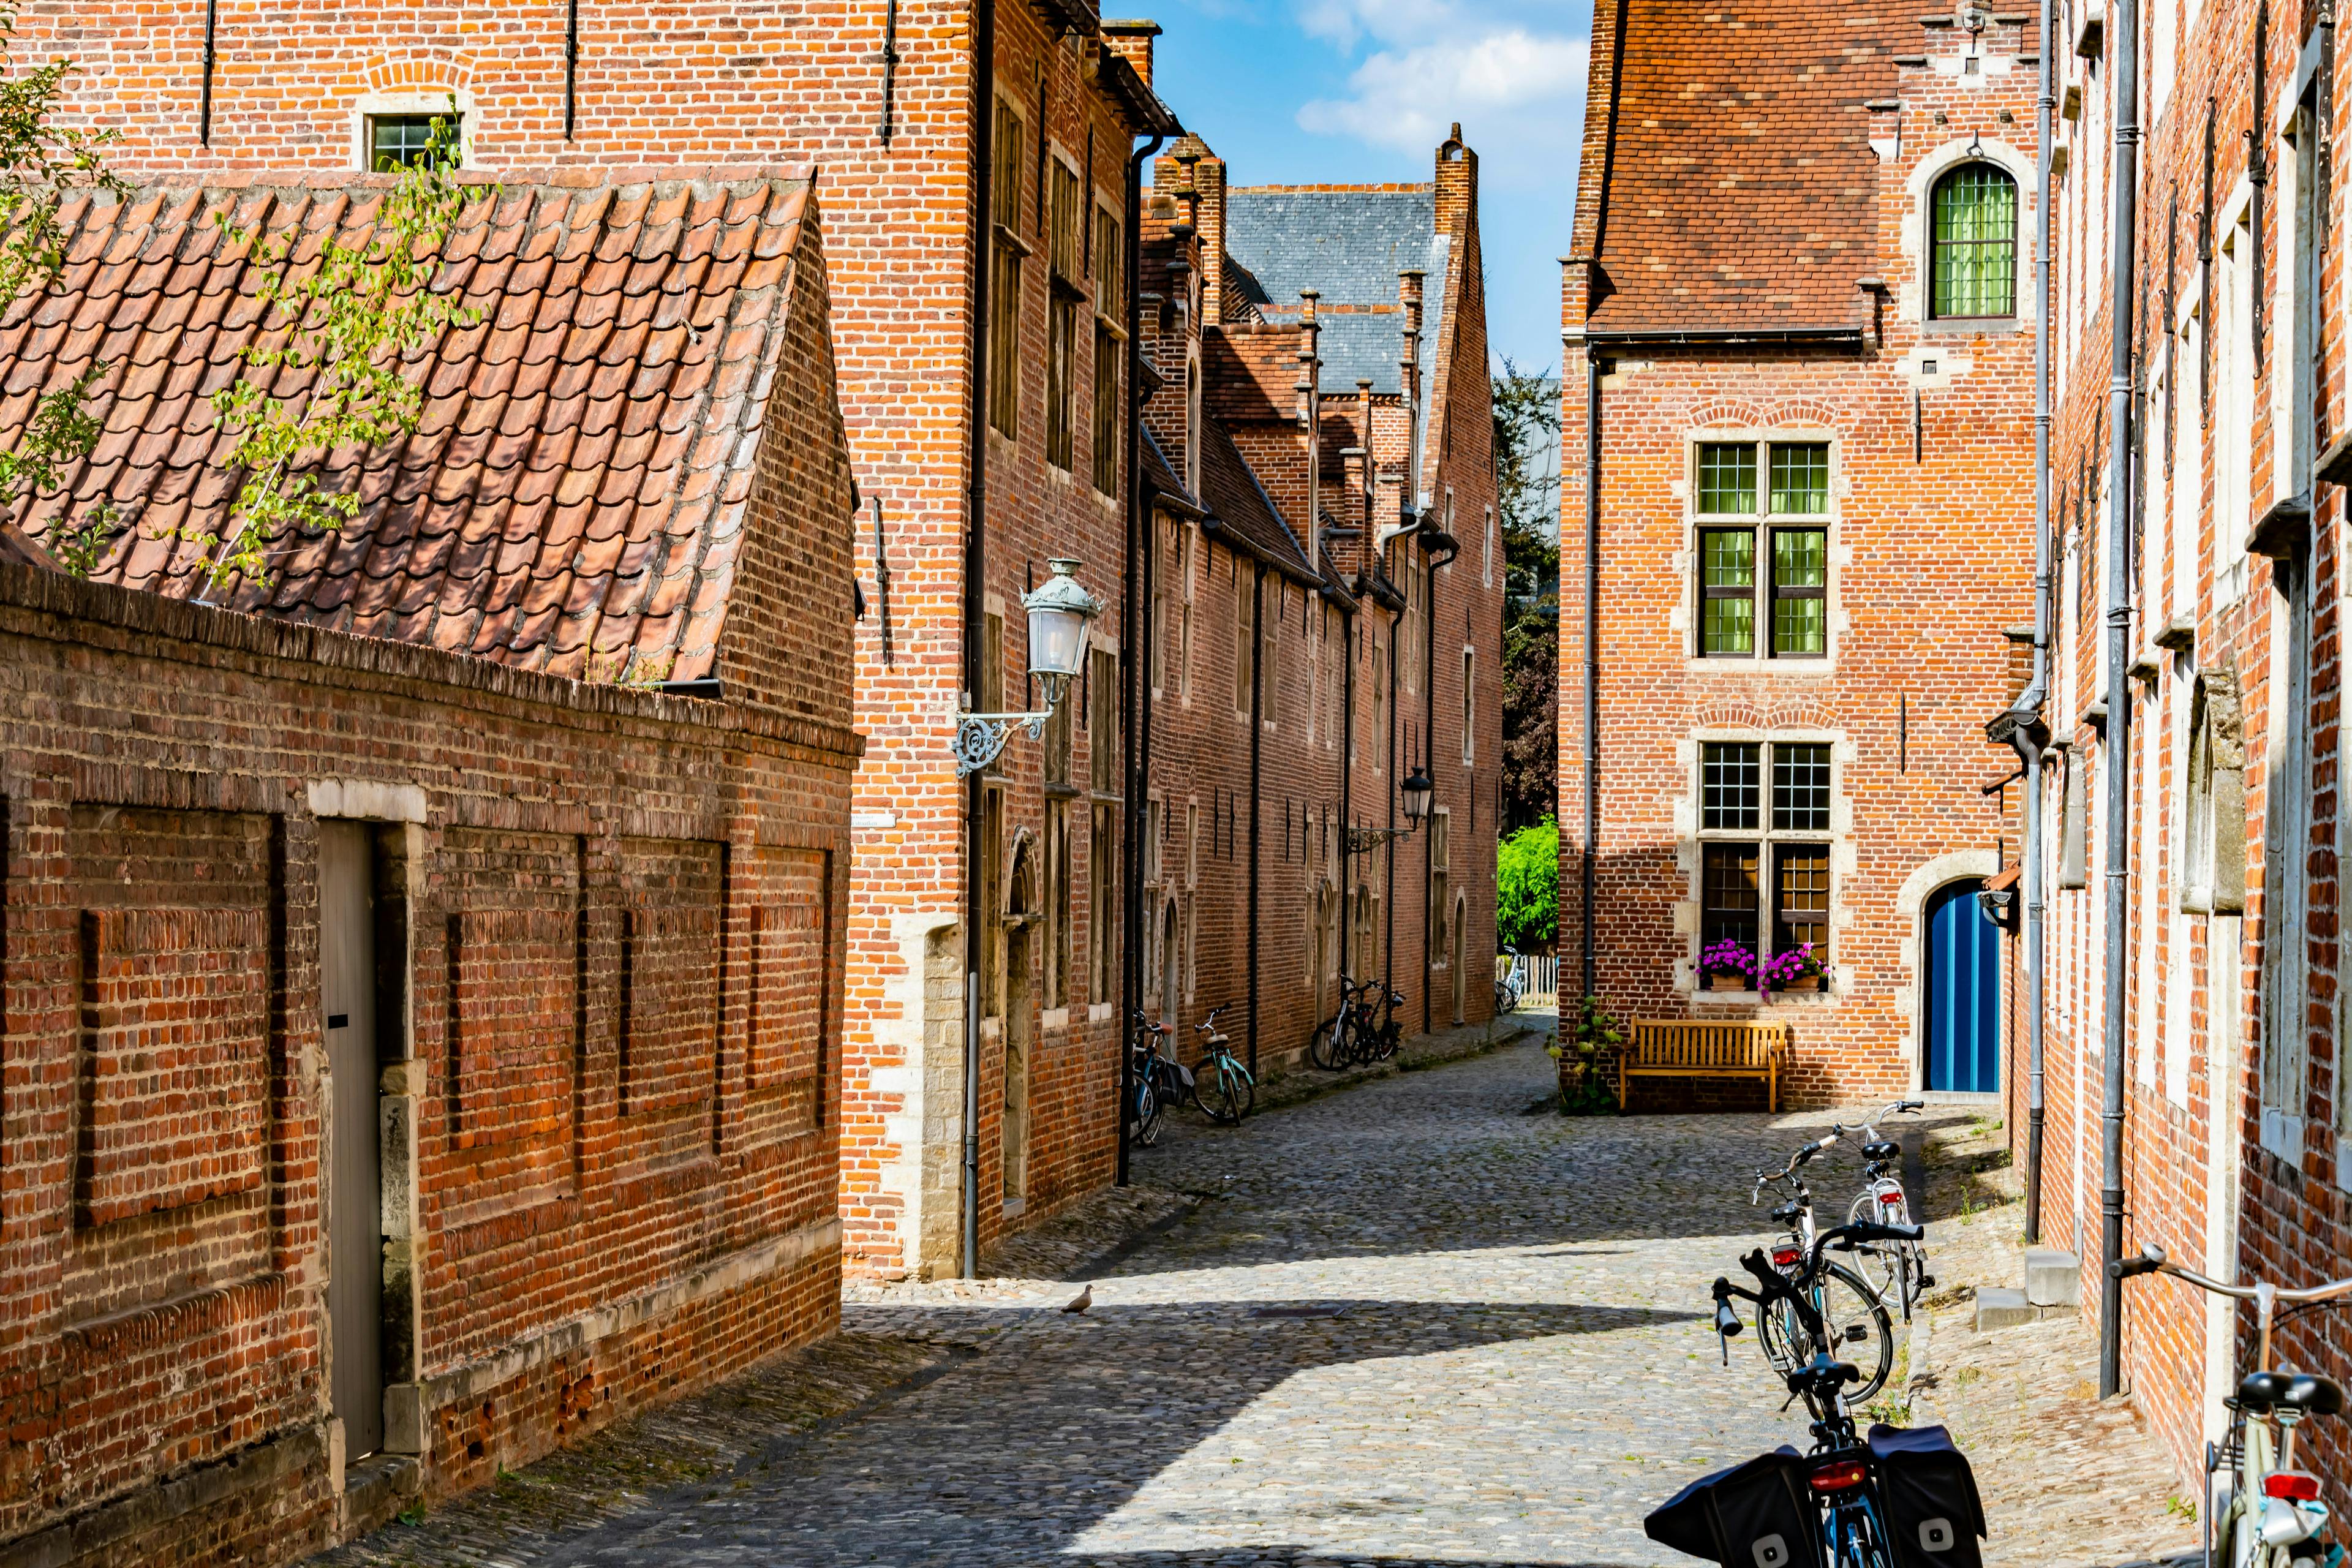 Historical architecture of Great Beguinage of Leuven, Belgium | Image Credit: © monticellllo - stock.adobe.com